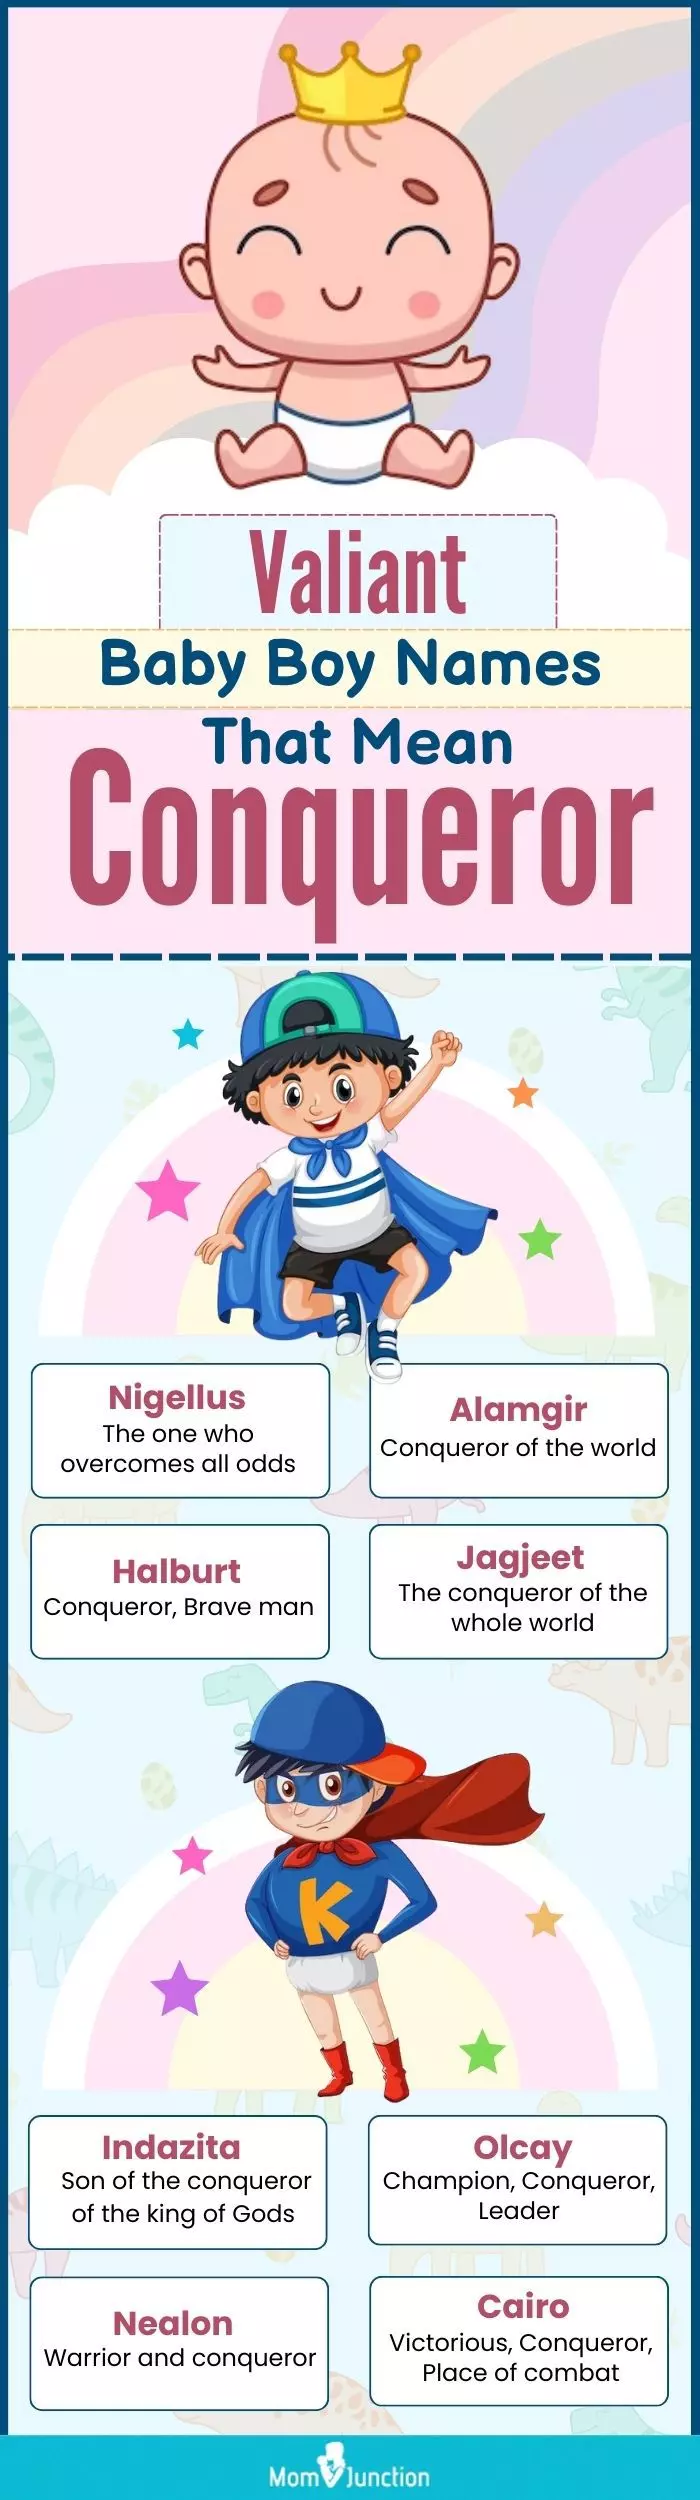 valiant baby boy names that mean conqueror (infographic)